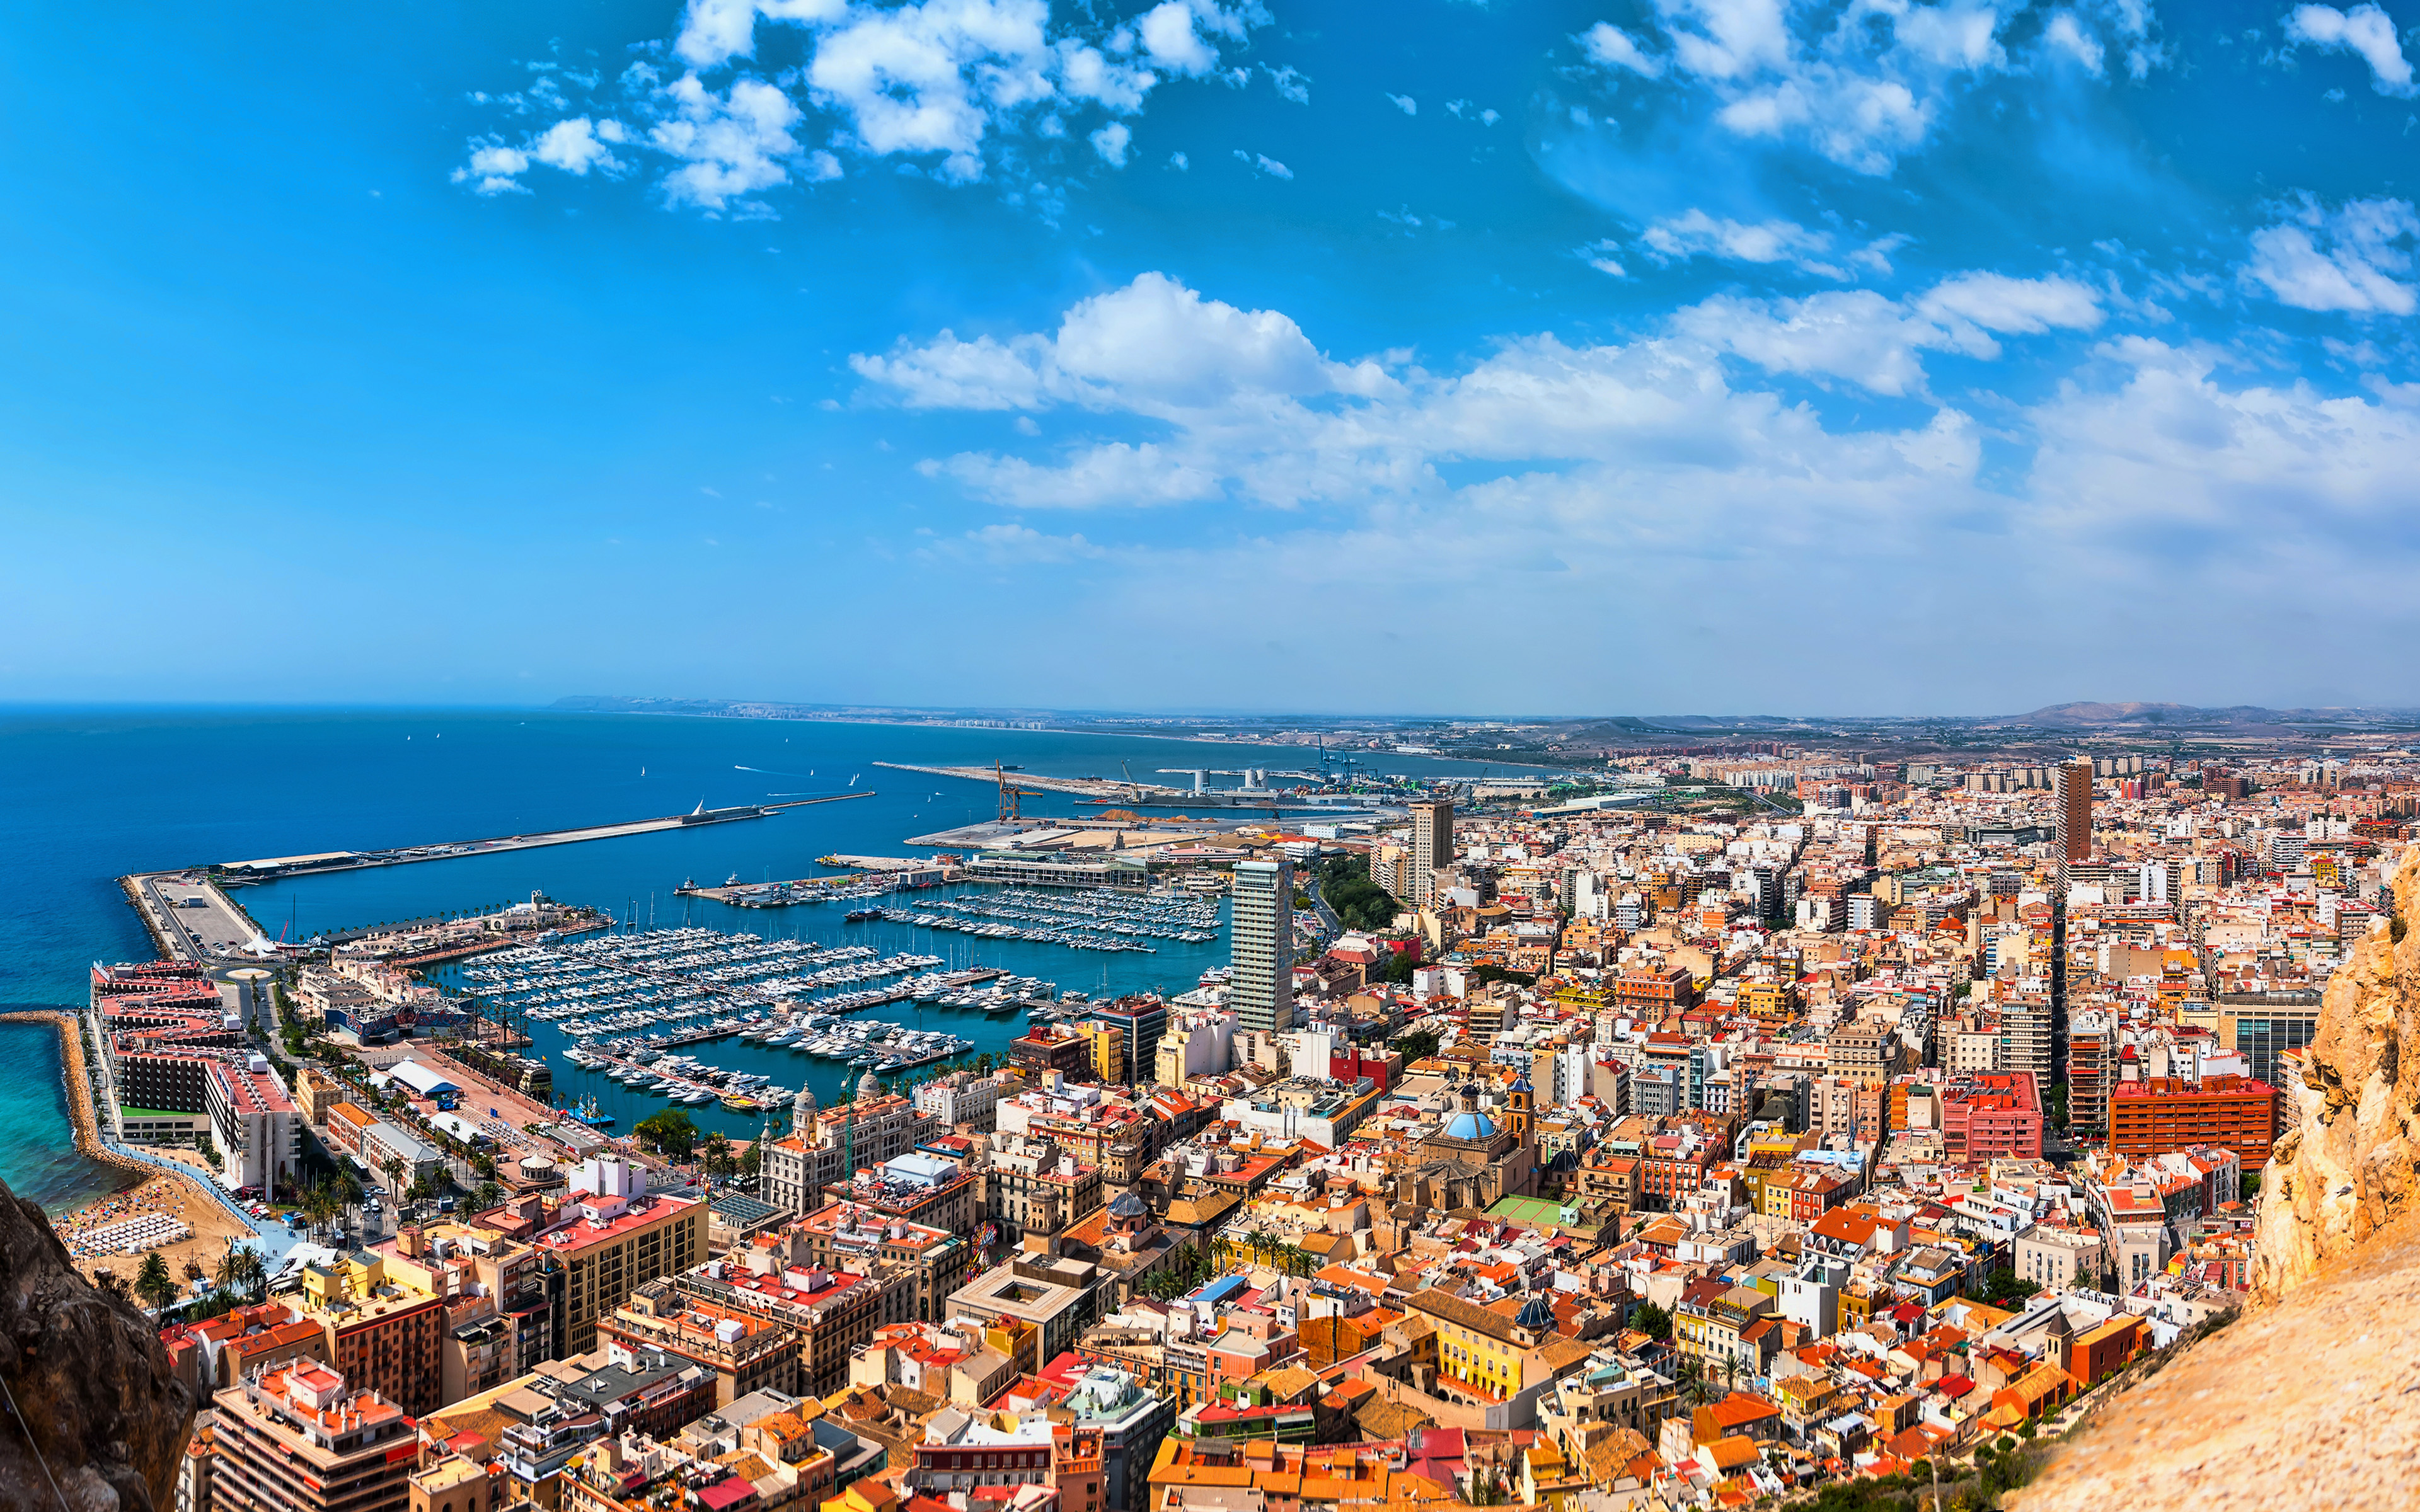 Download wallpaper Alicante, 4k, summer, cityscapes, spanish cities, Spain, Alicante skyline, Cities of Spain for desktop with resolution 3840x2400. High Quality HD picture wallpaper